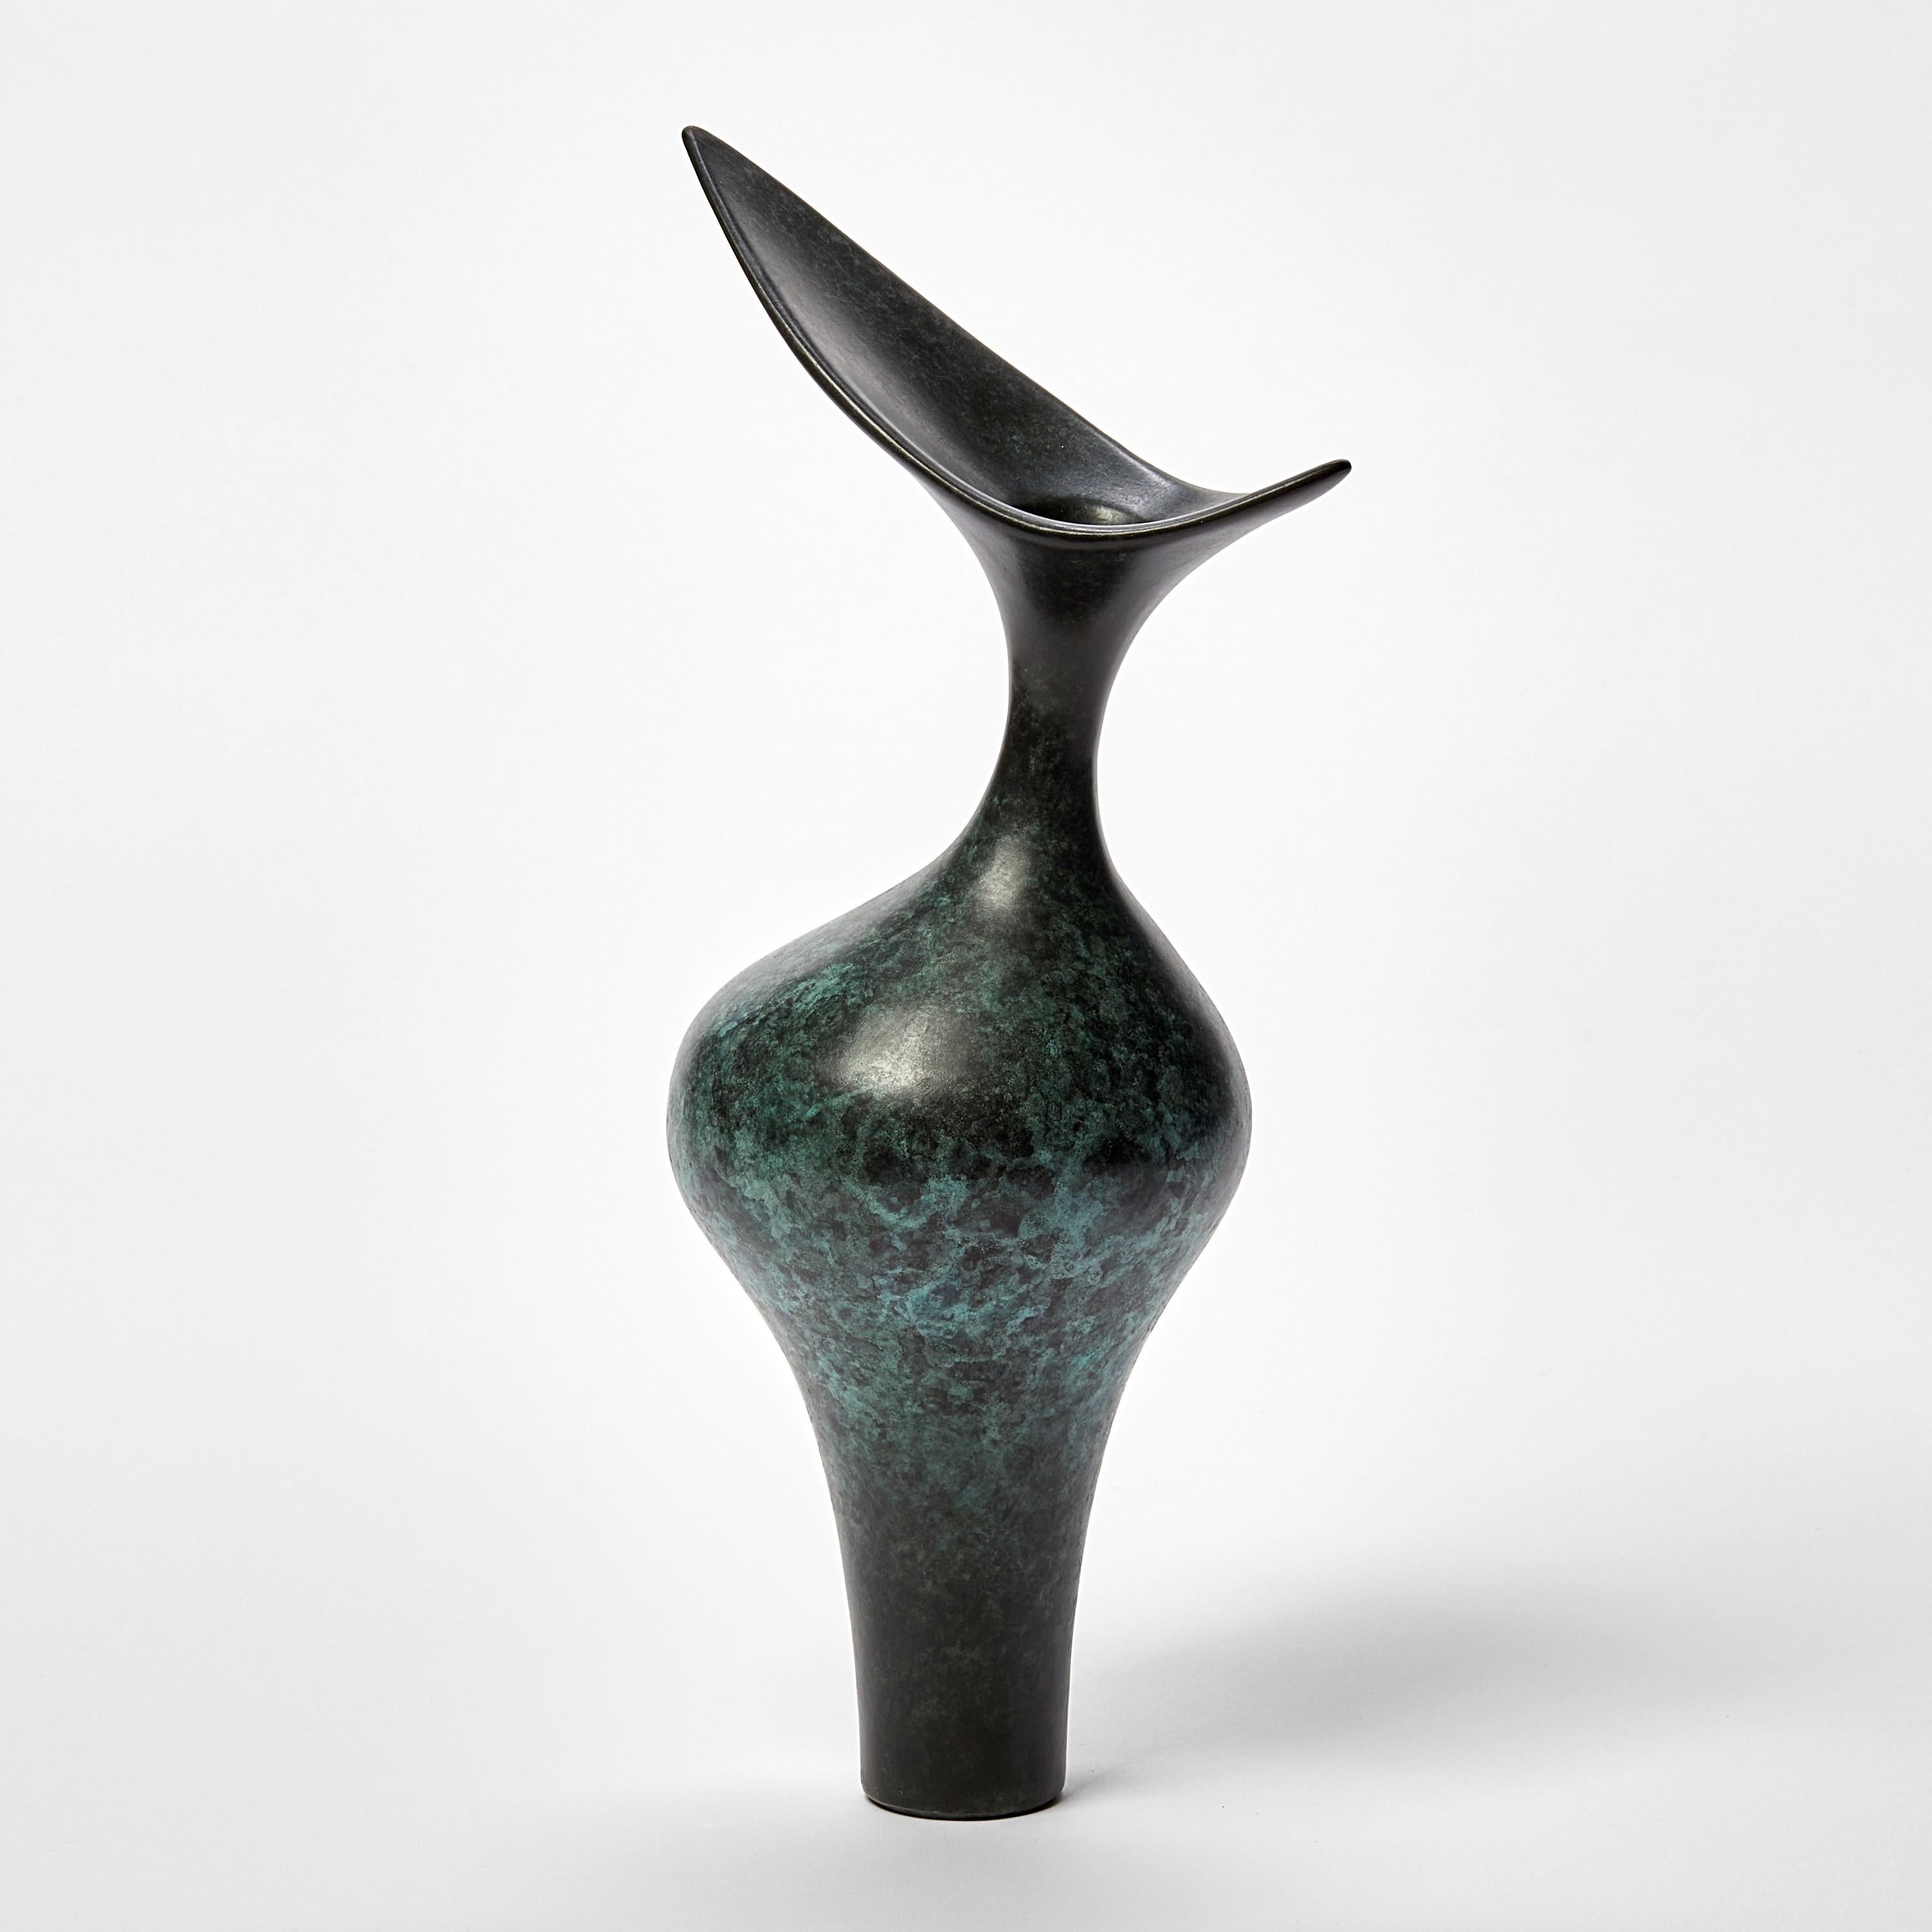 ‘Tall Bird Form’ is a limited edition bronze sculpture by the British artist, Vivienne Foley.

Vivienne Foley is based in Gloucestershire where she produces exquisite ceramic sculpture. Although in essence they are often functional pieces in form,